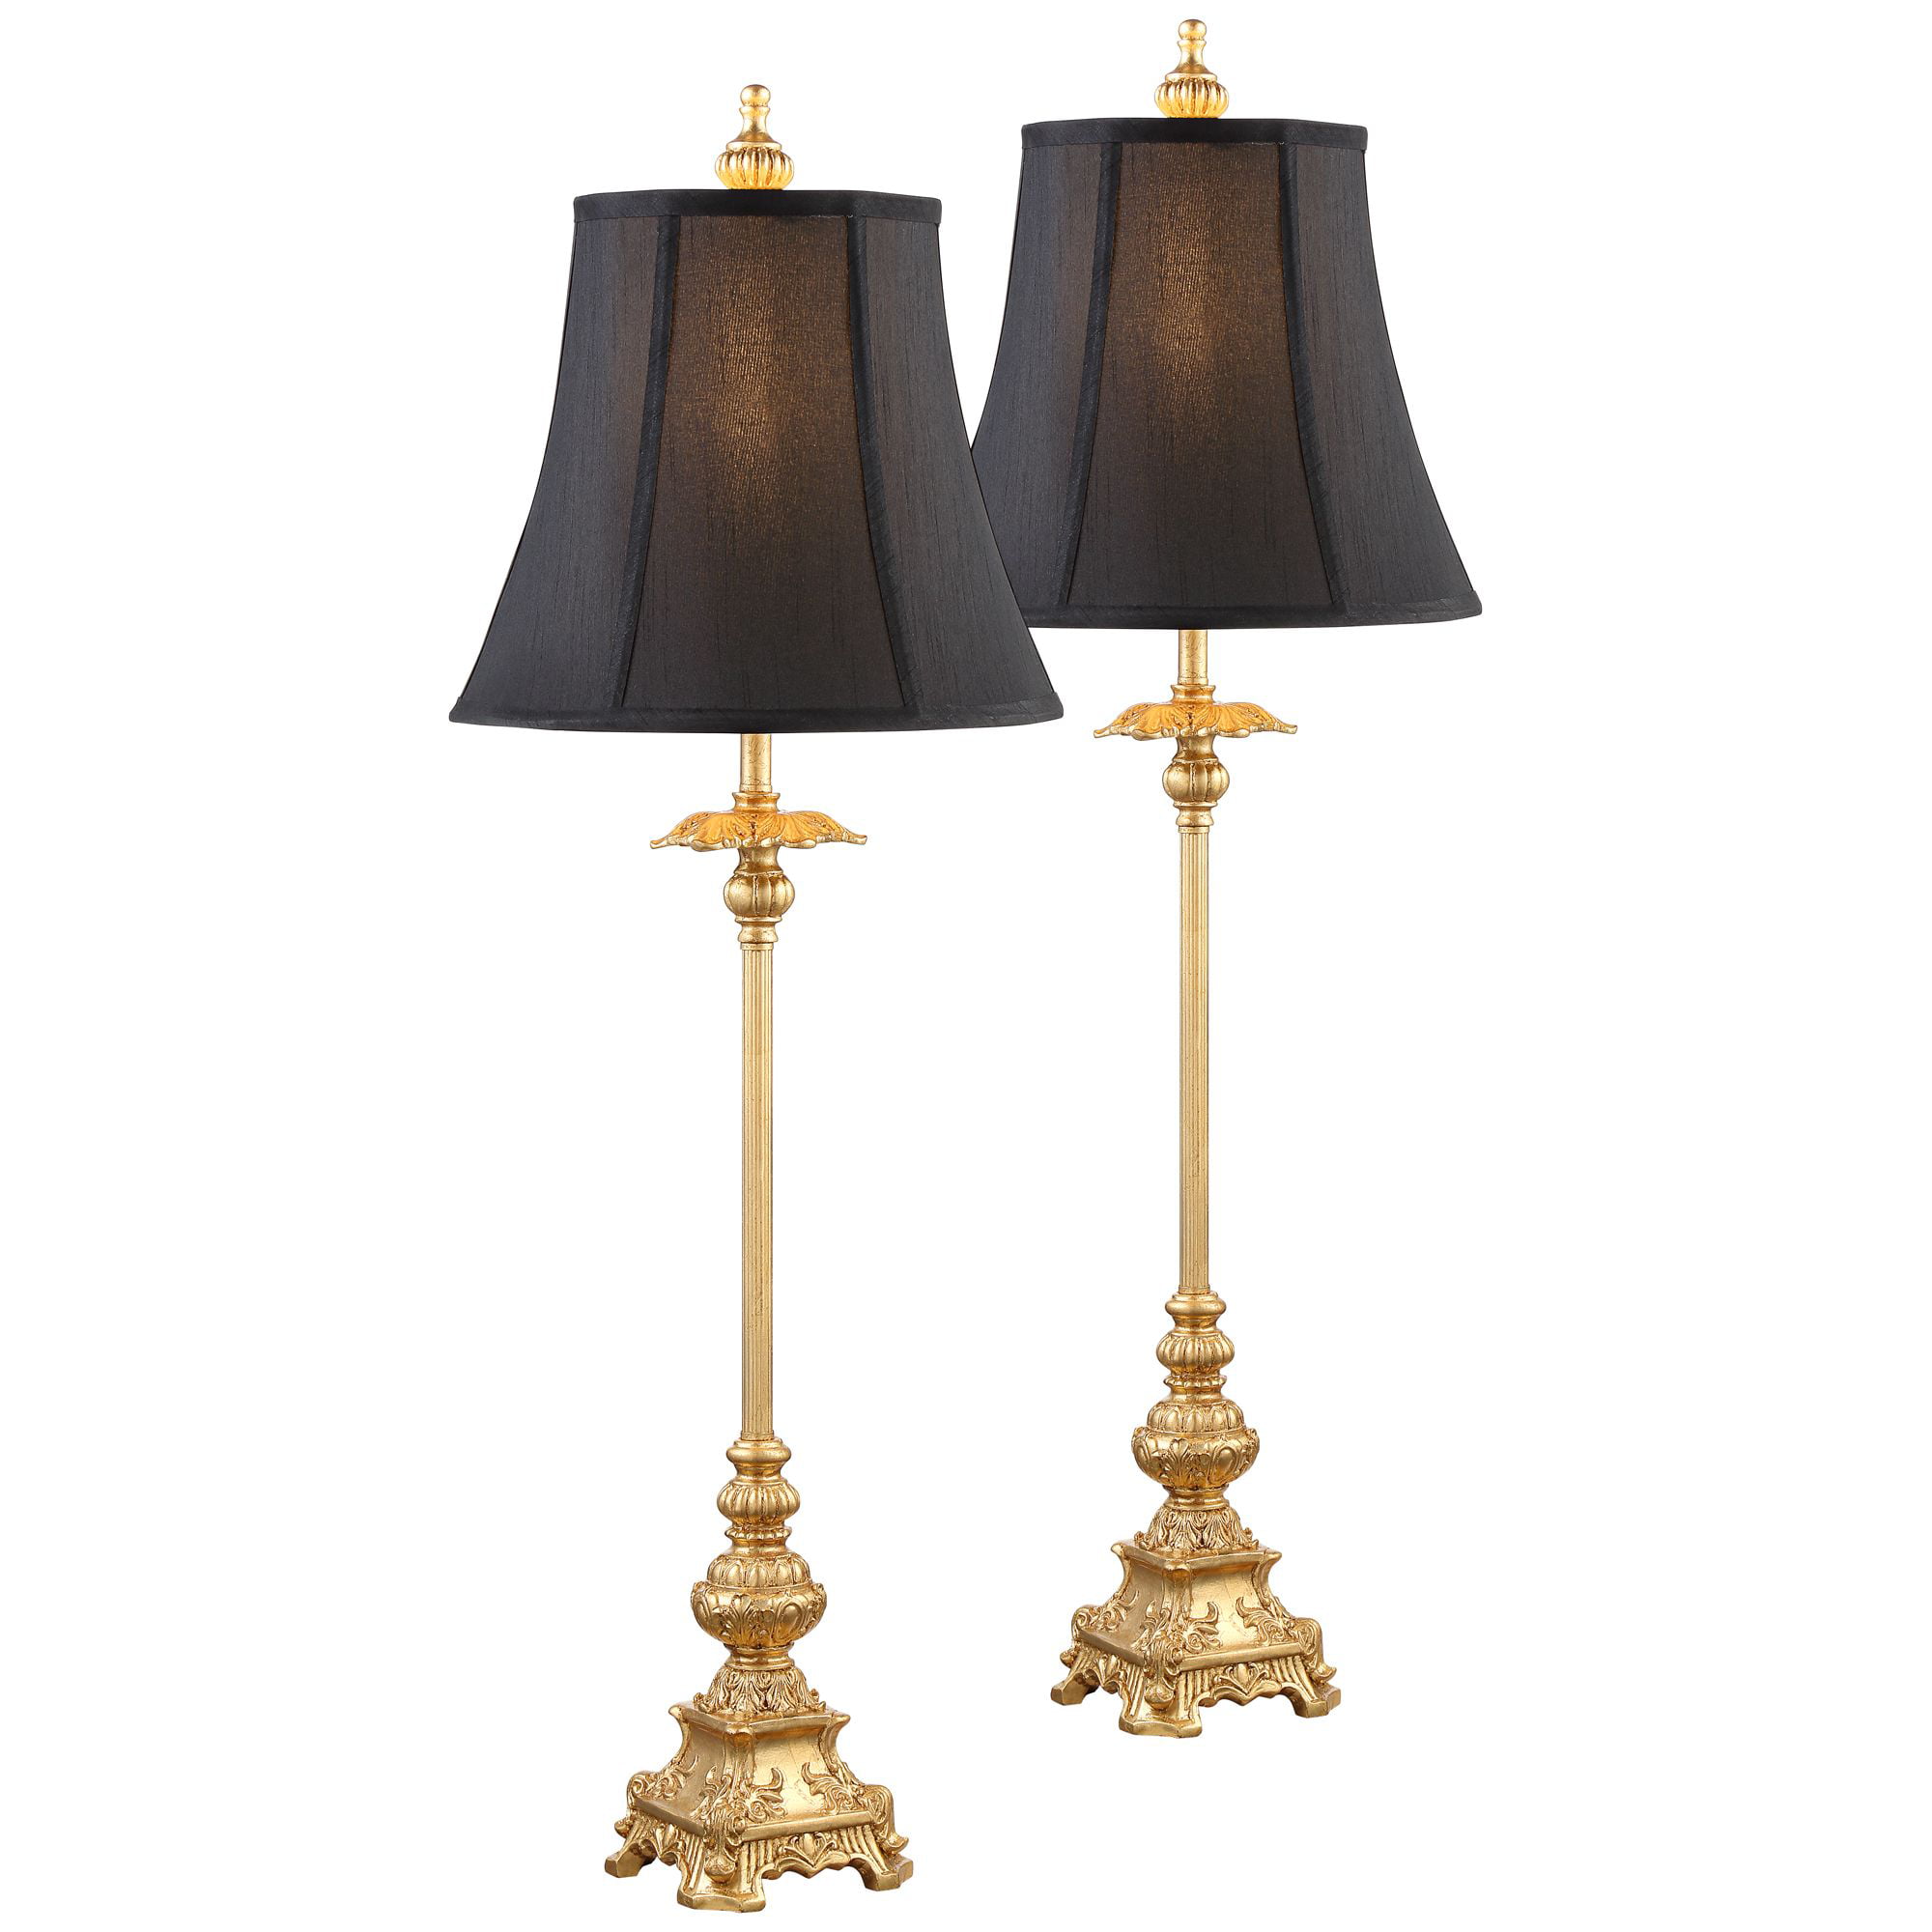 Regency Hill Traditional Buffet Table Lamps Set of 2 Gold Intricate